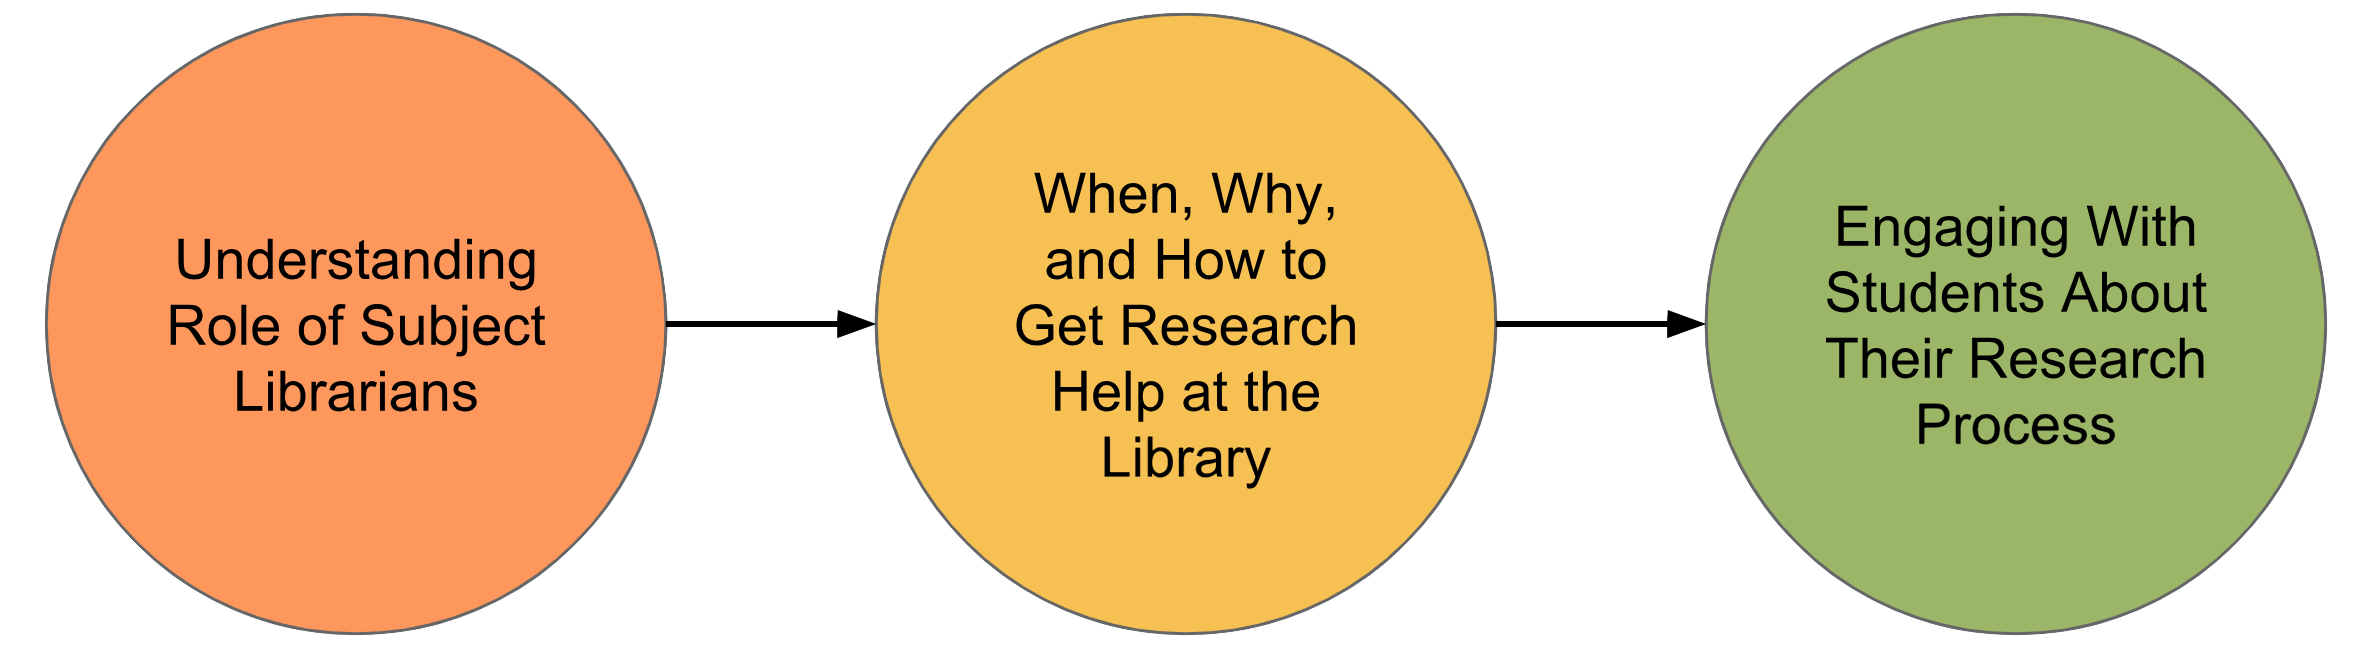 Our learning outcome evolved from understanding the role of subject librarians, to when, why, and how to get research help at the library, to engaging with students about their research process.